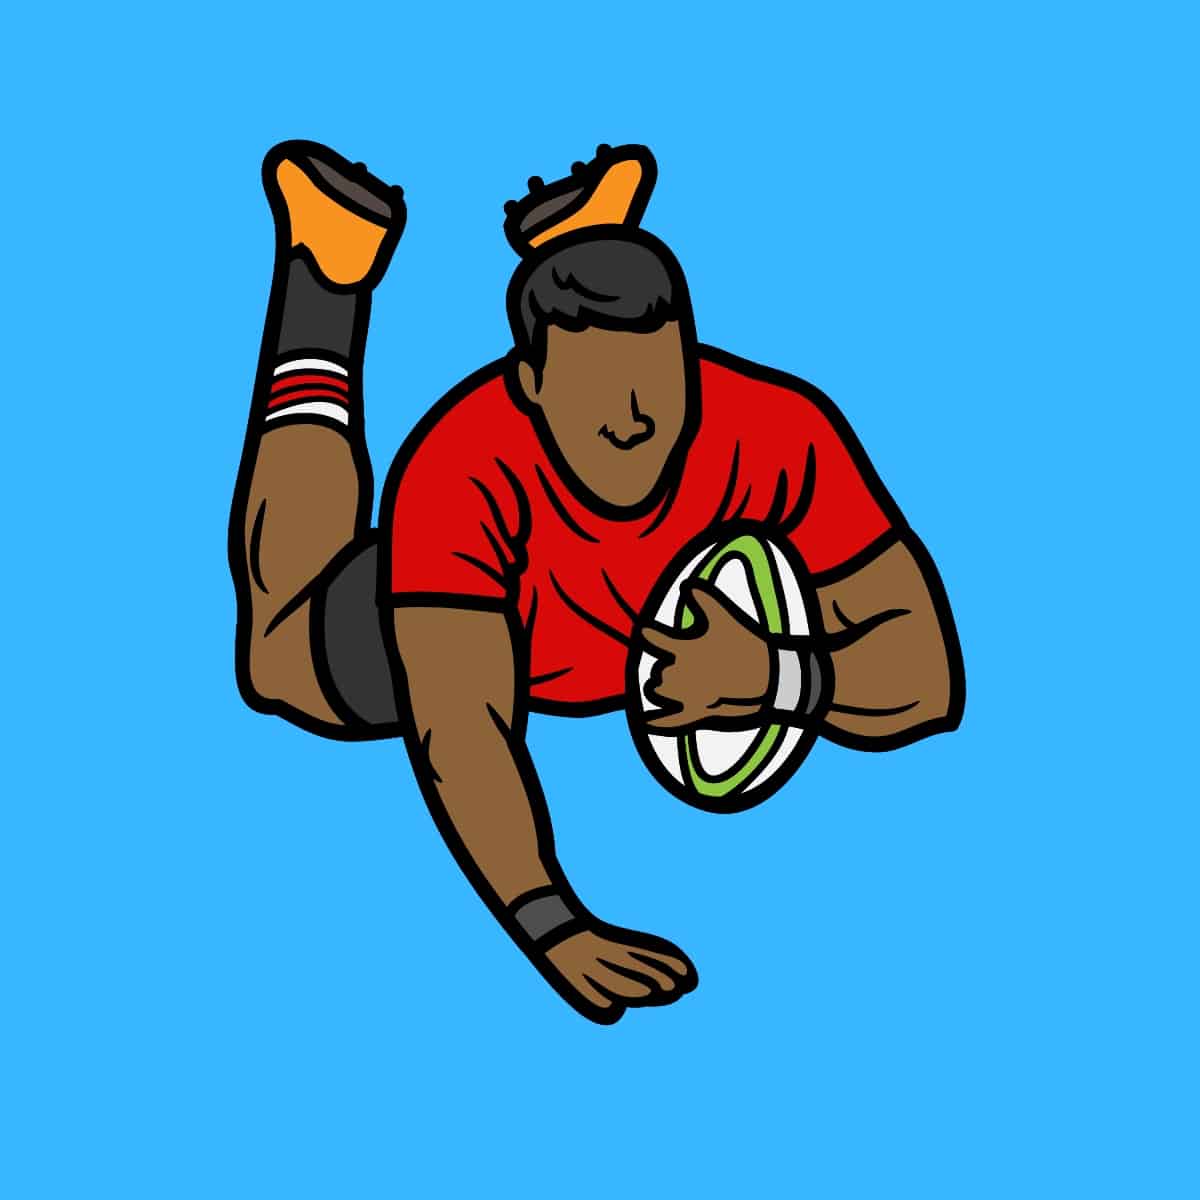 Cartoon graphic of a rugby playing diving and about to score a try on blue background.